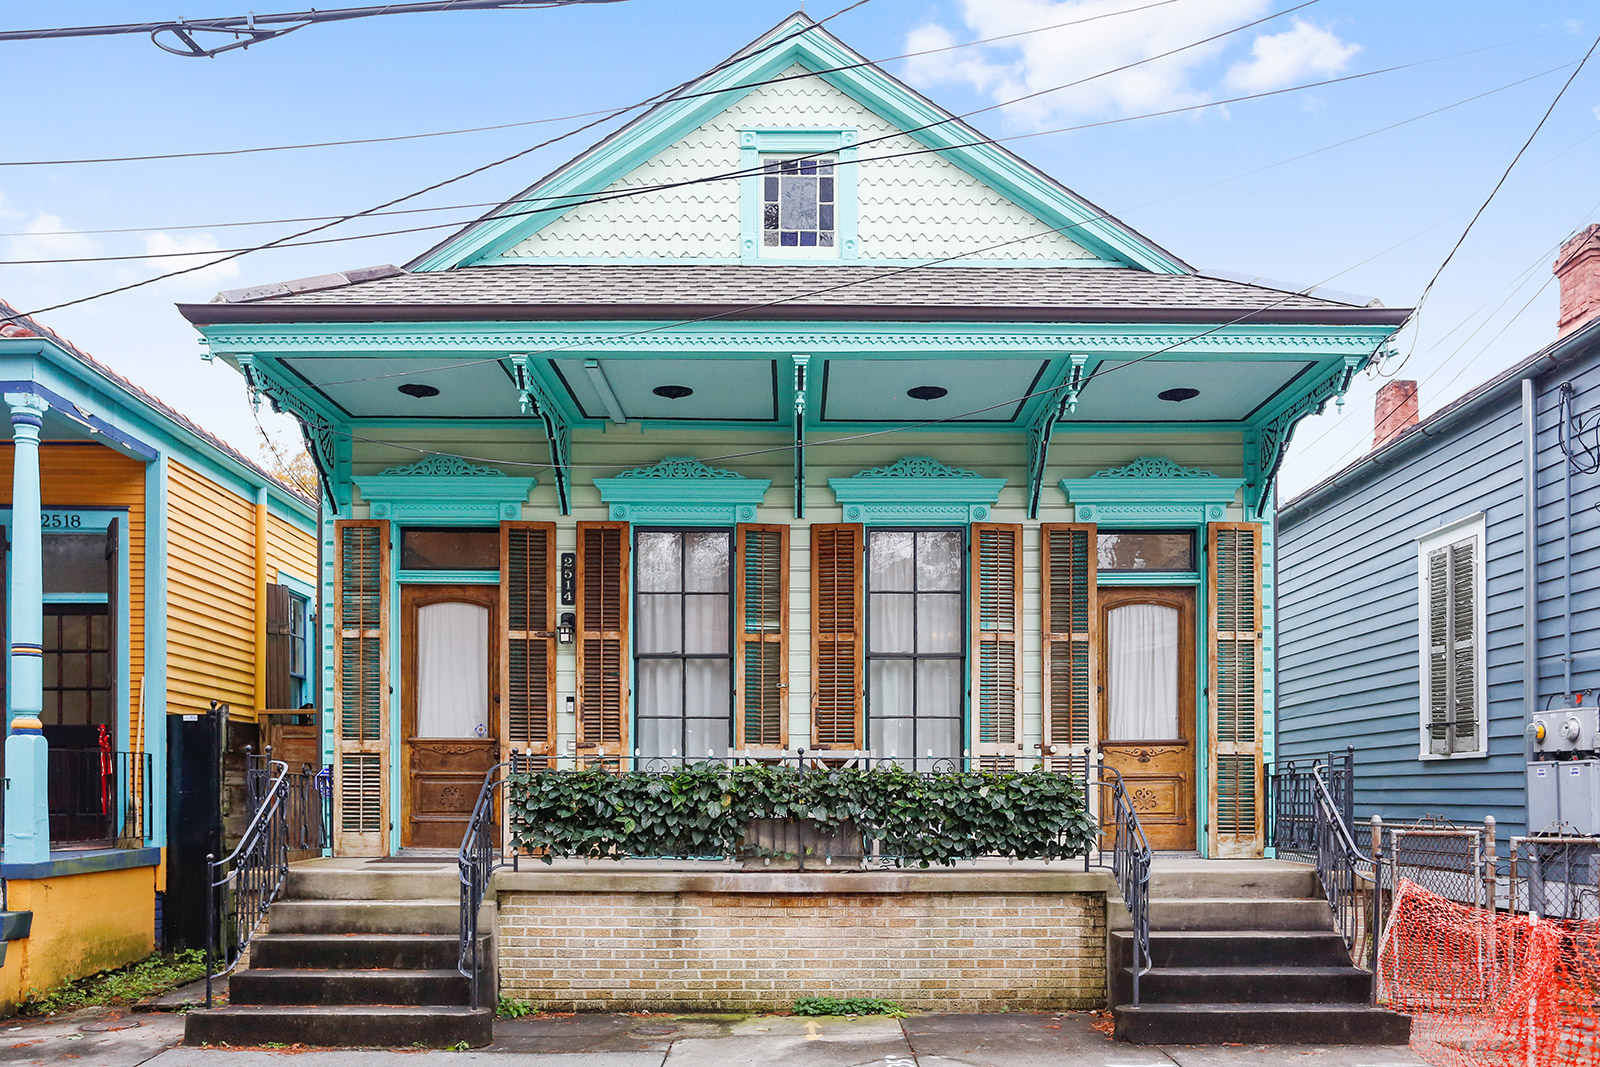 People in Faubourg Marigny are passionate about preservation.